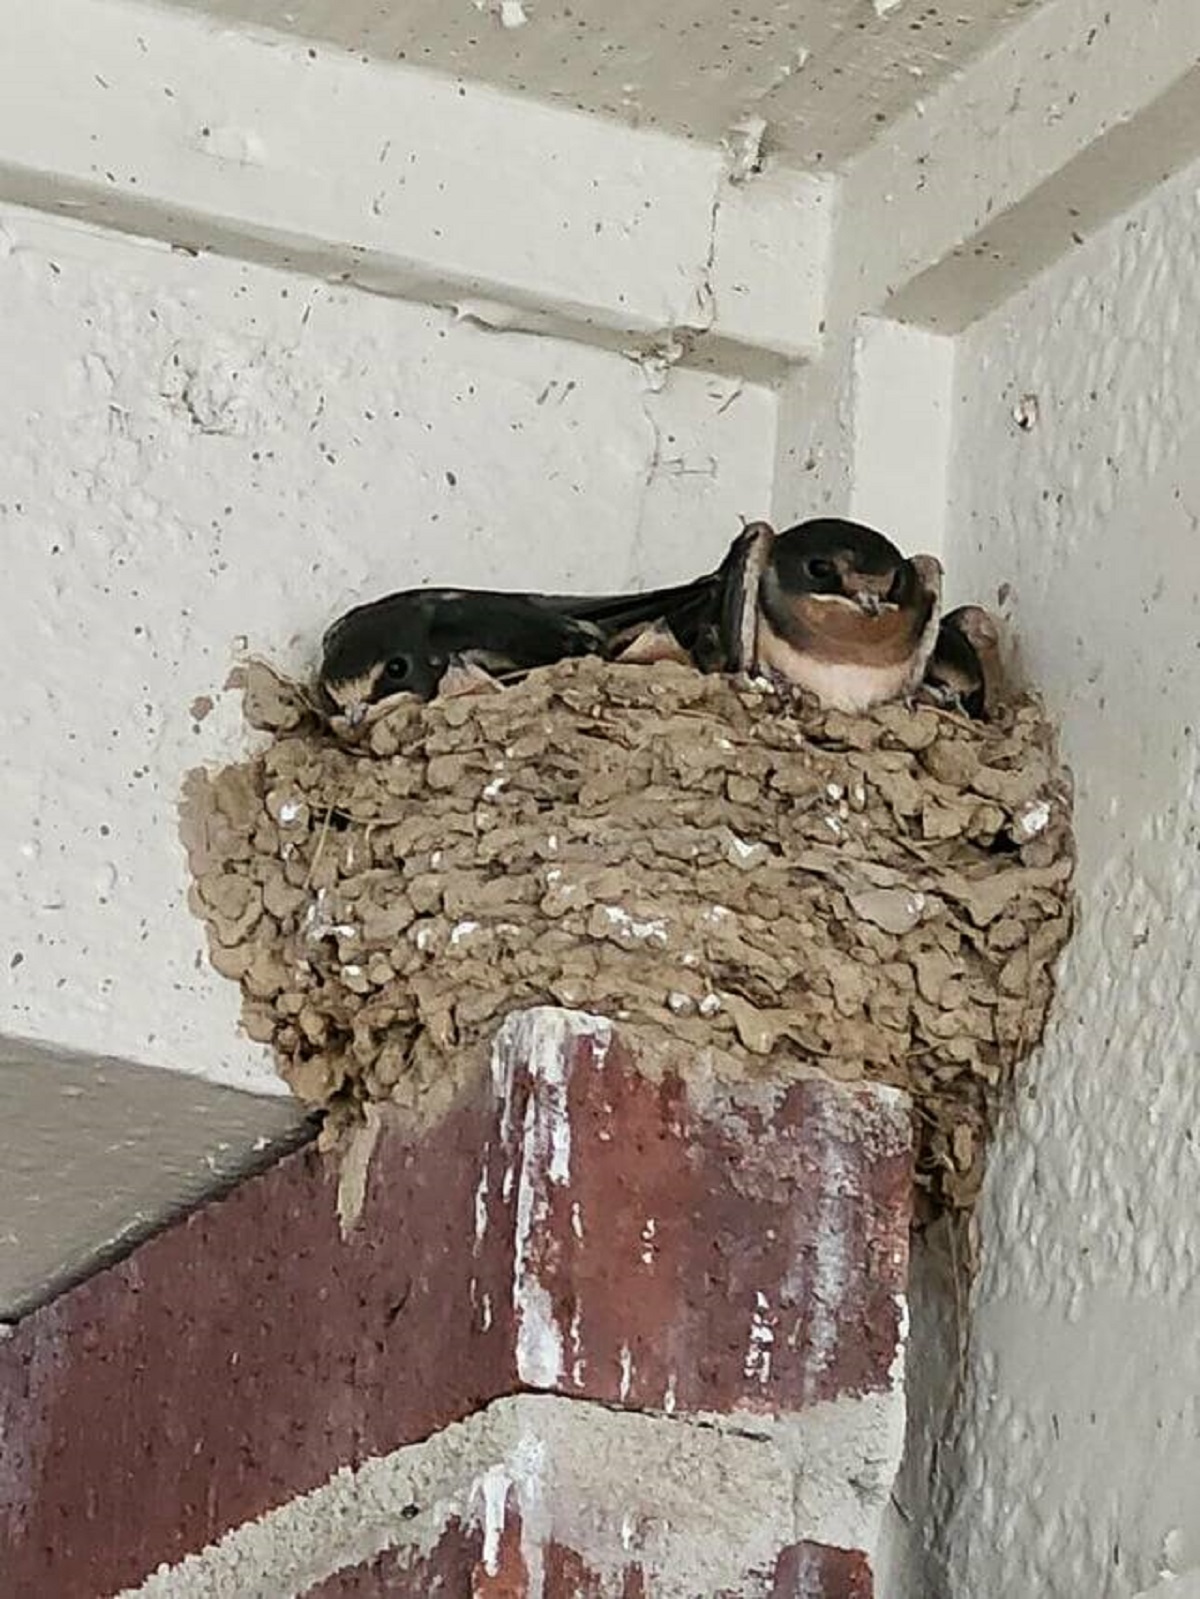 "There is a bird nest with 4 newborn babies. Right above my door"